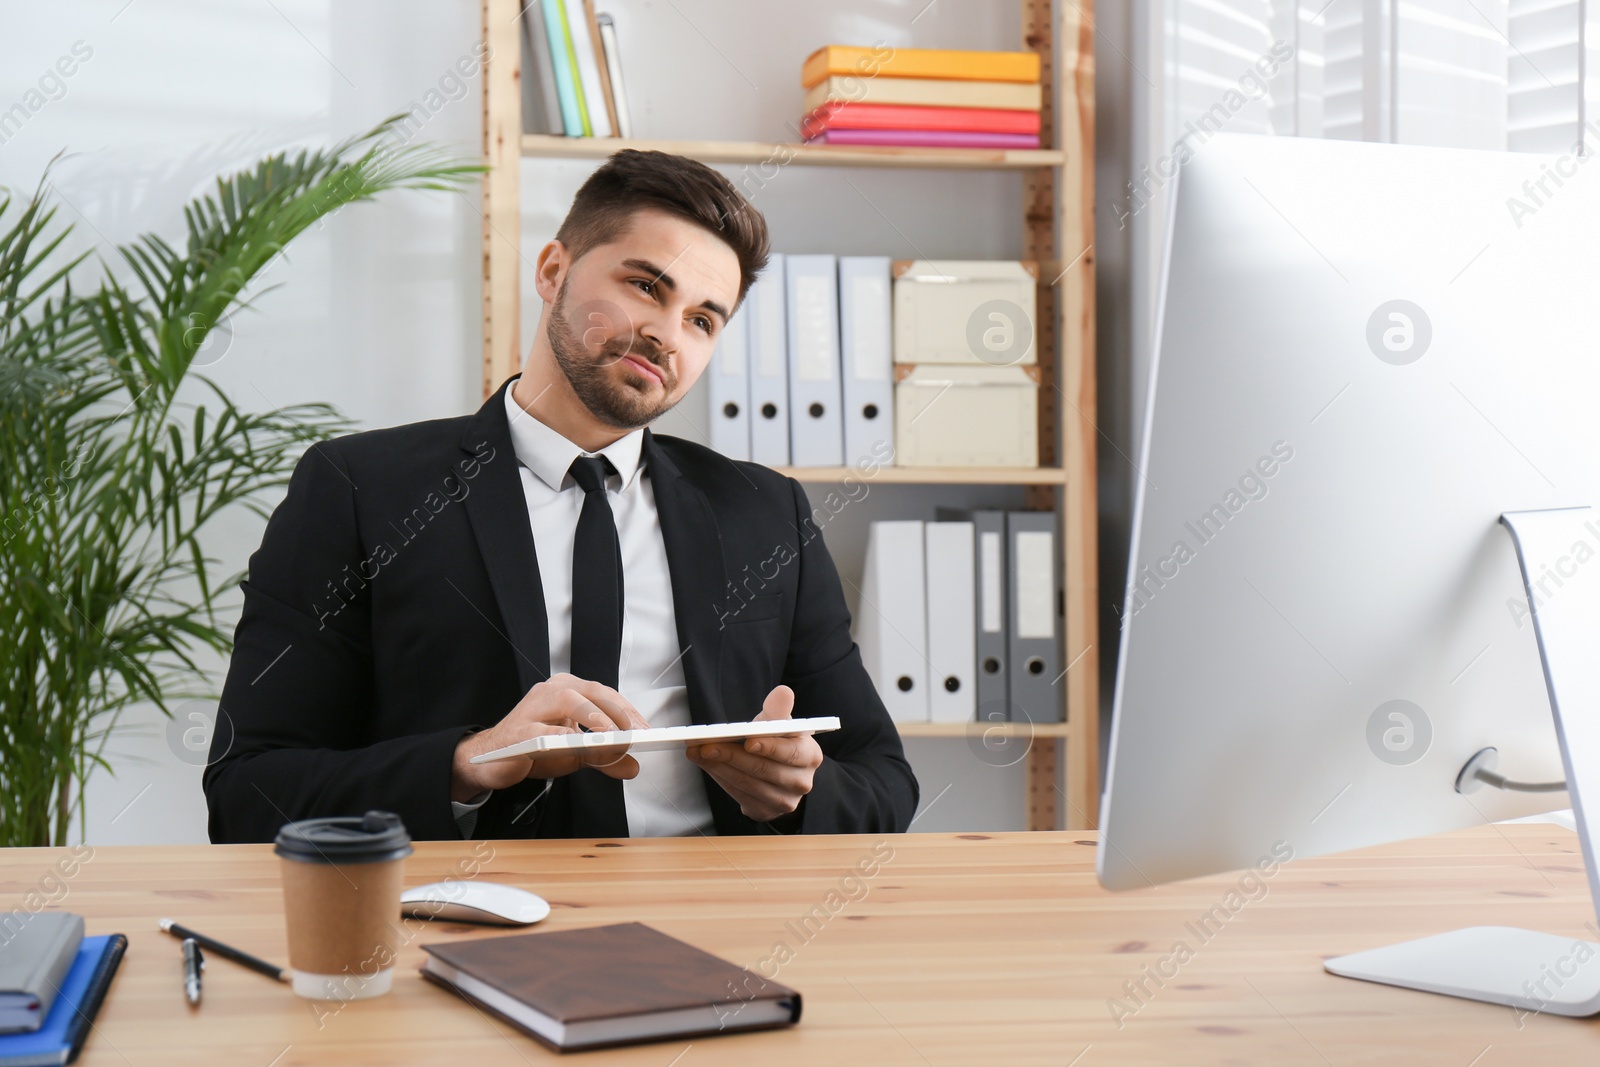 Photo of Lazy employee playing with keyboard at table in office